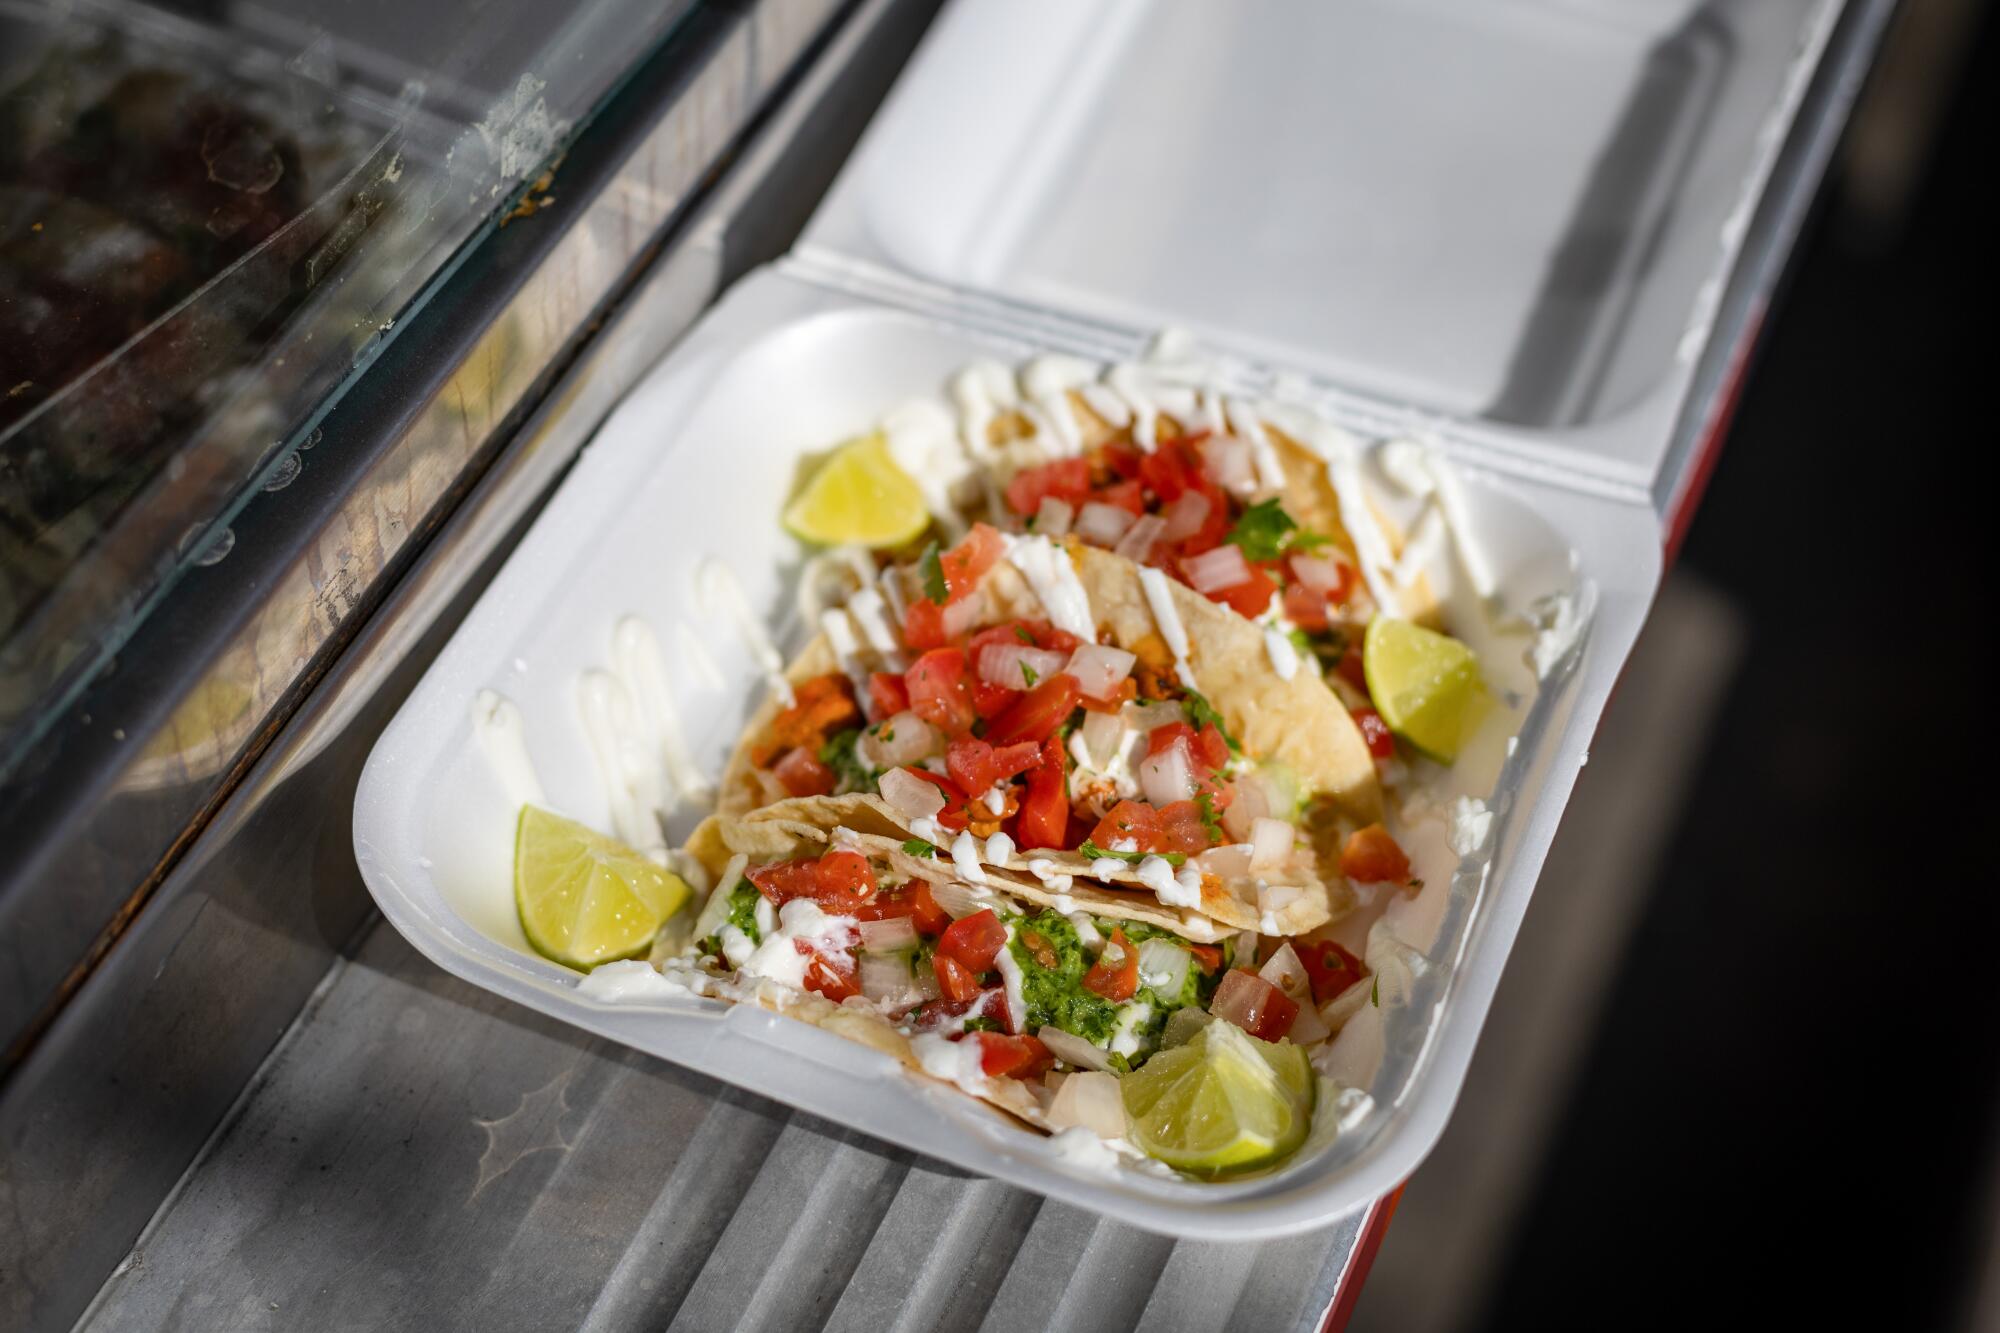 A styrofoam container of tacos at All Flavor No Grease.